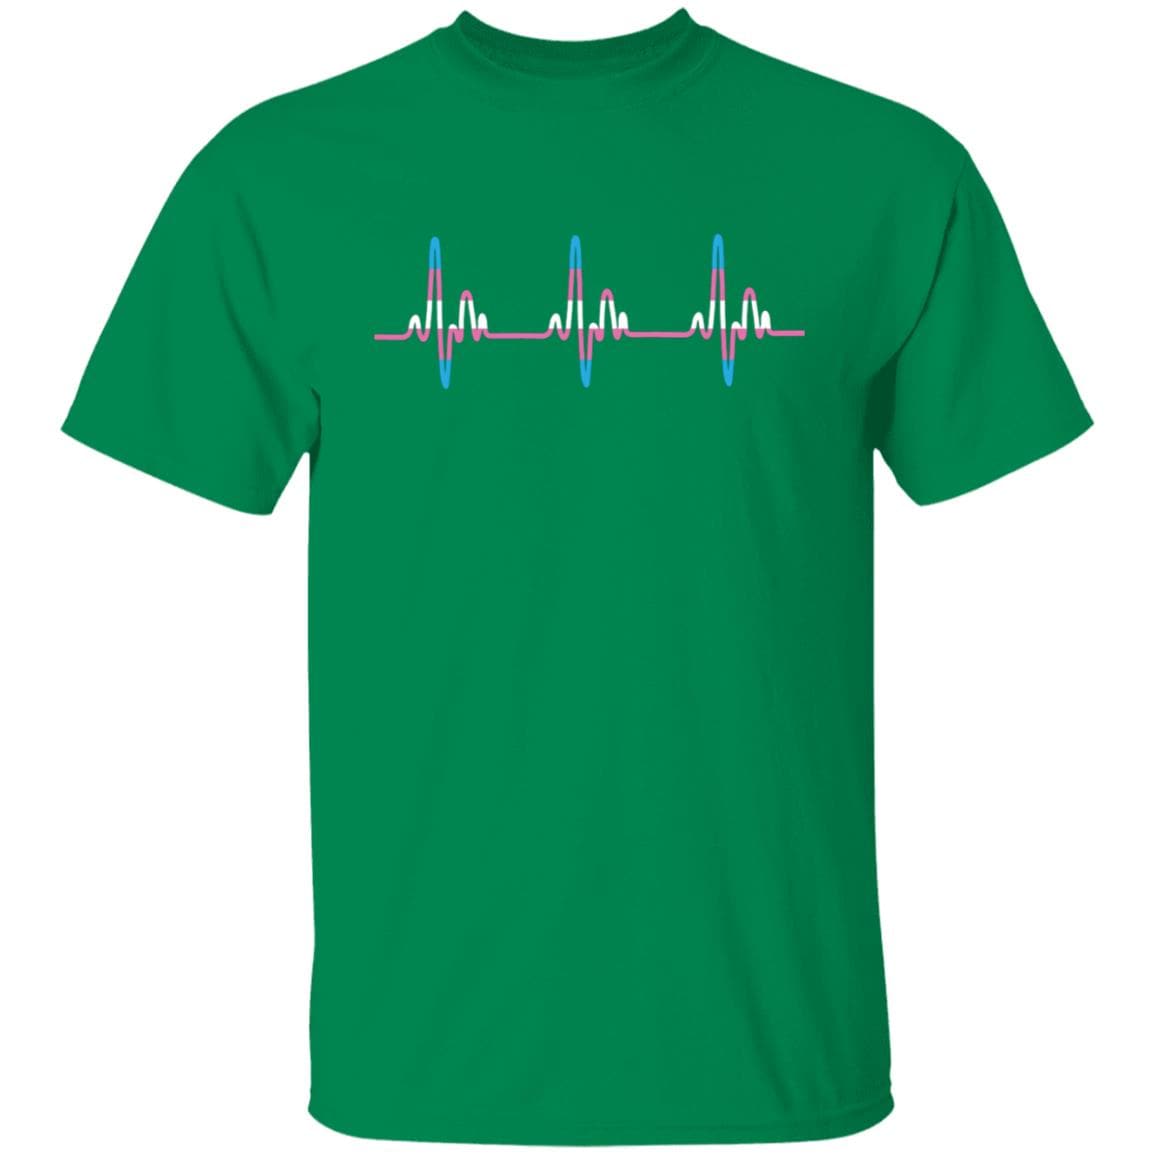 Trans Heartbeat T-Shirt - PrideBooth